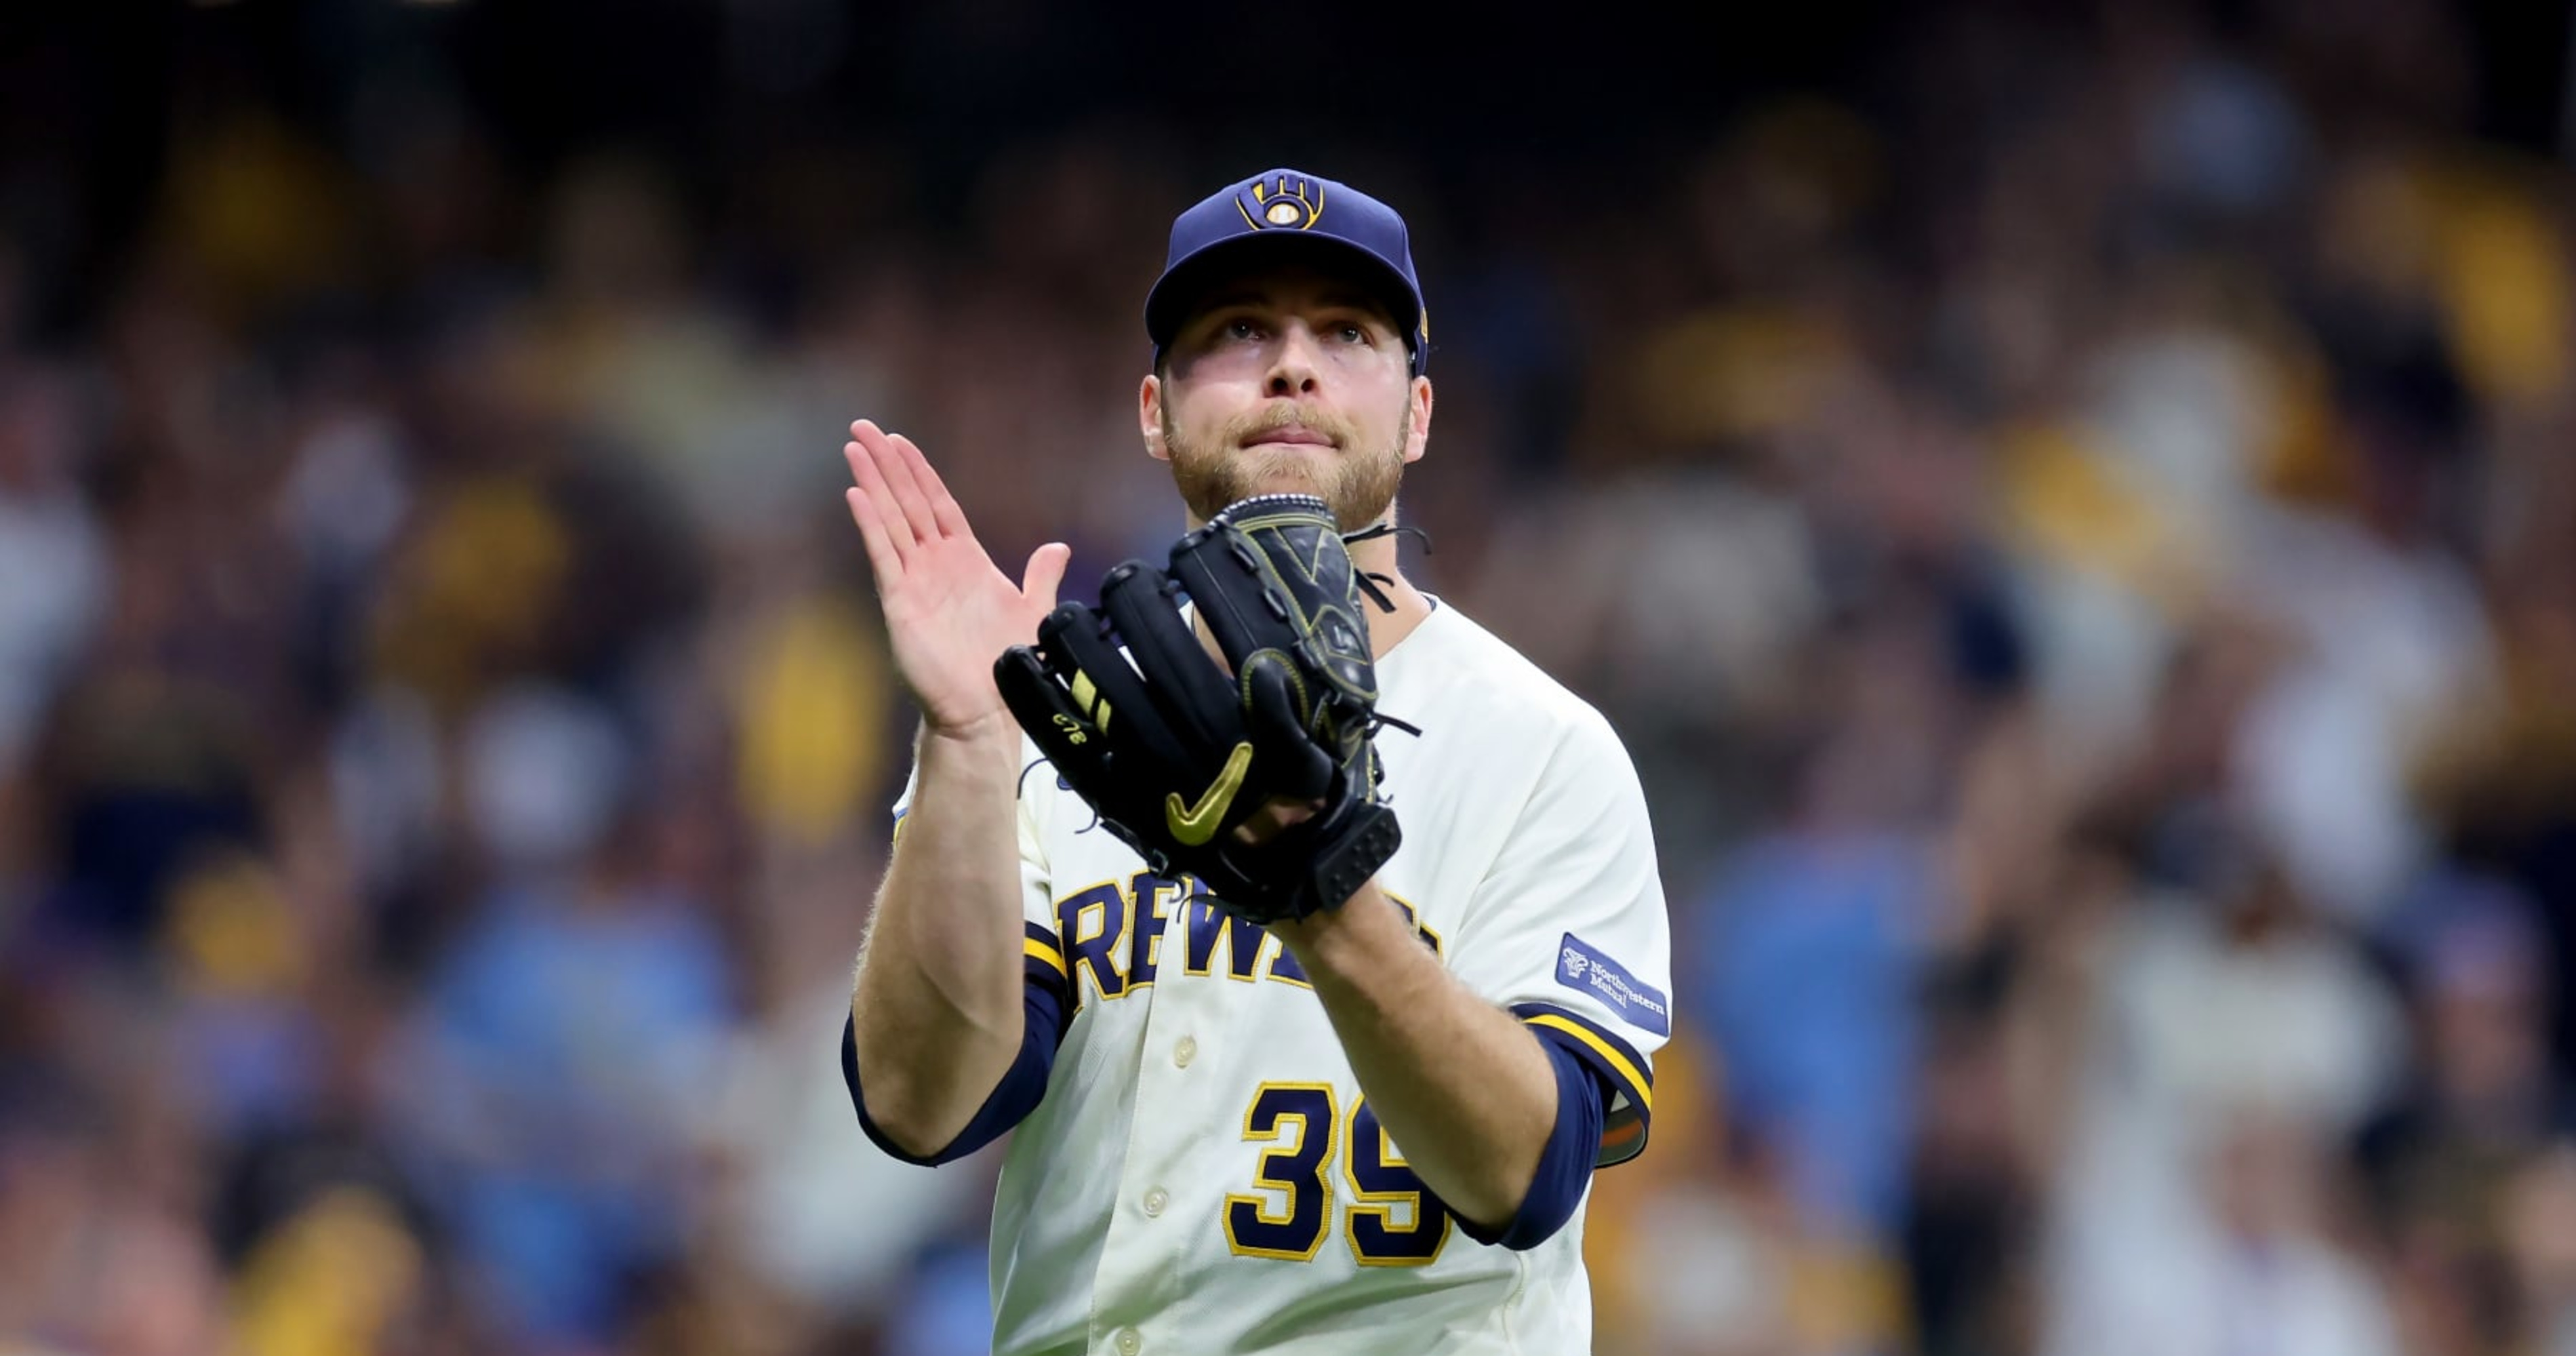 Corbin Burnes pulled from no-hitter after career-high 115 pitches